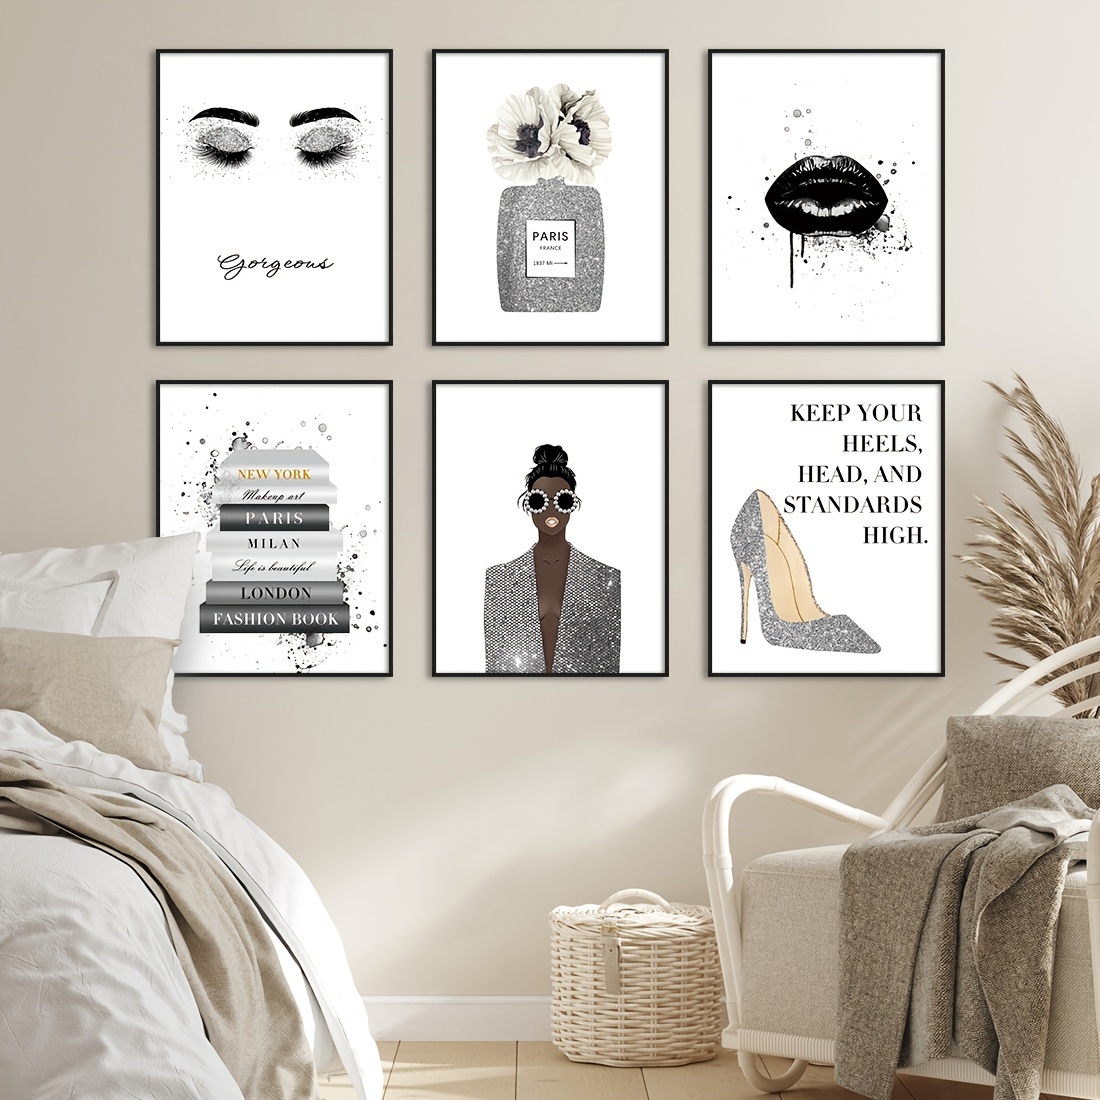 Designer Shoes Wall Art - Fashion Design Poster print - Books of Glam Wall  Decor - Glamour Home Decor - Luxury Gifts for Women - Girls Bedroom, Living